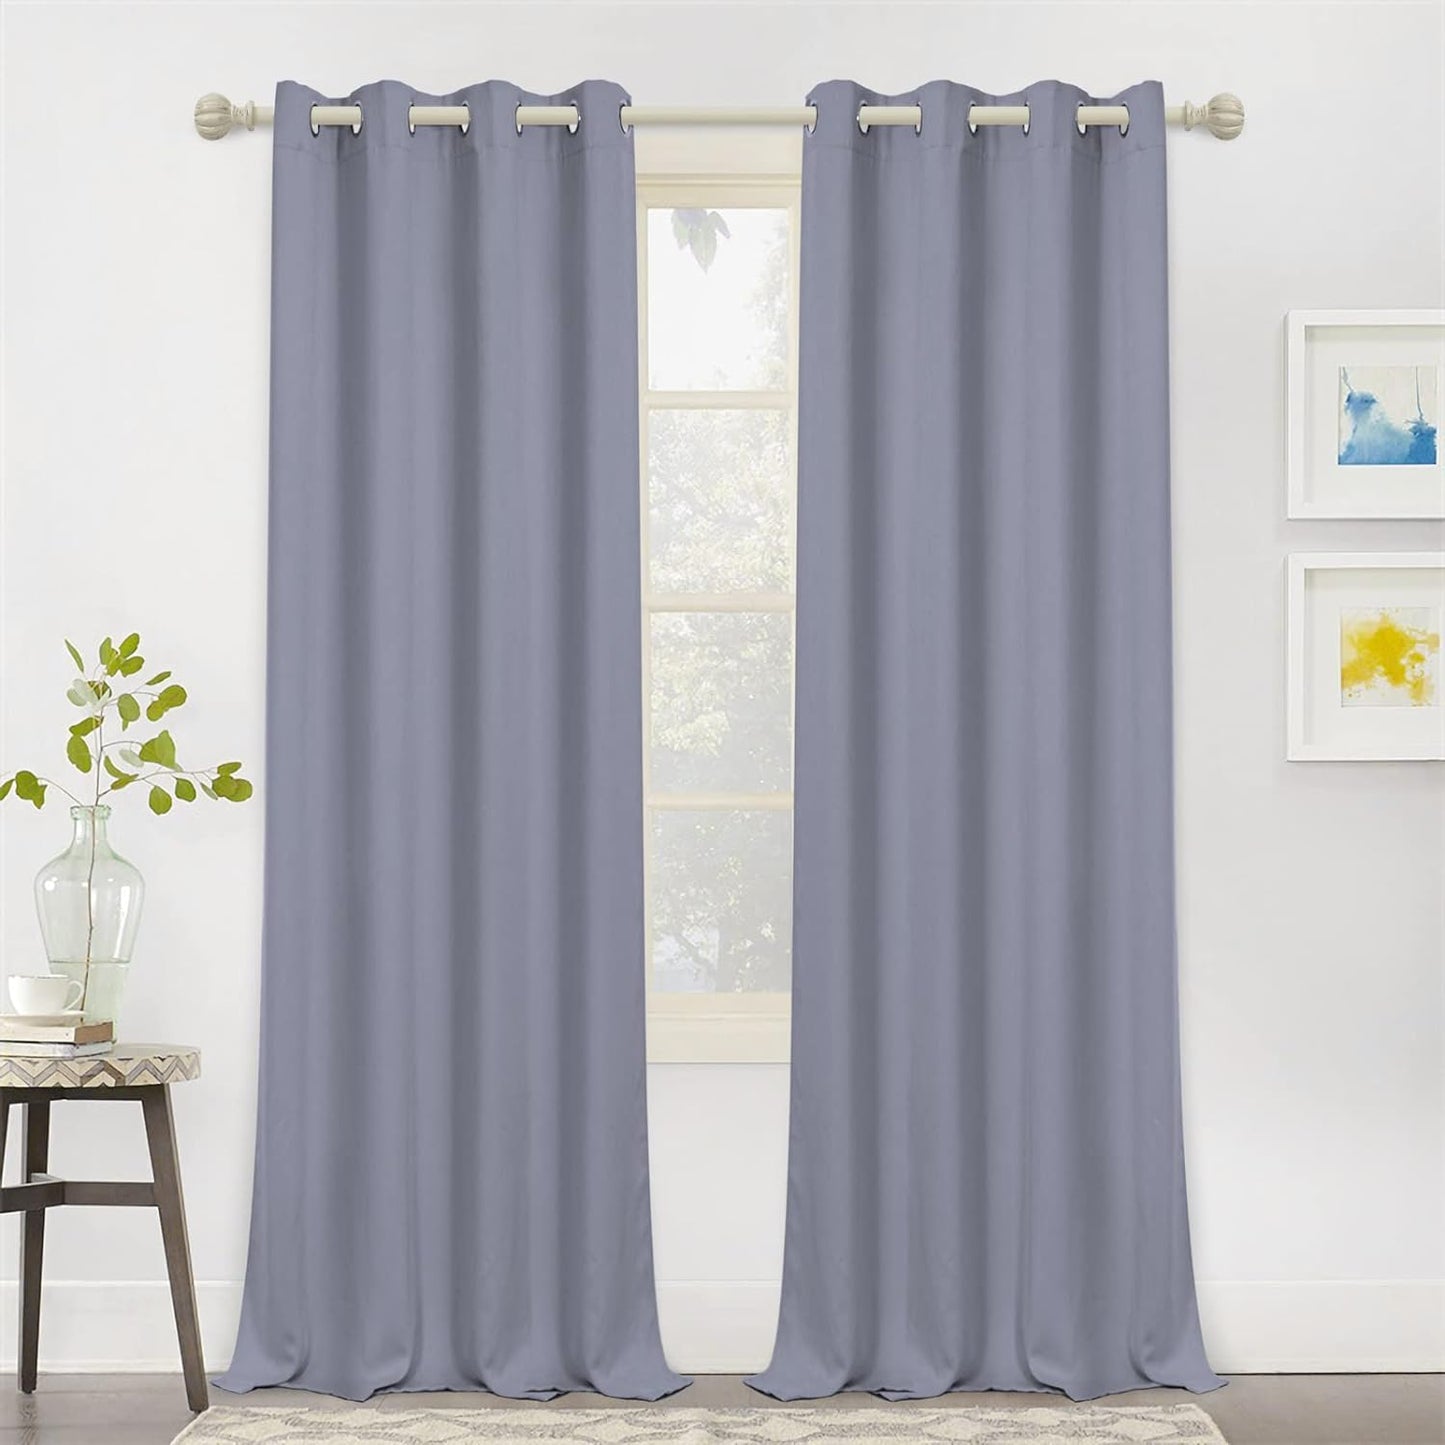 MYSKY HOME Black Curtains for Bedroom 90 Inch Long Blackout Curtains for Living Room 2 Panels Thermal Insulated Grommet Room Darkening Curtains Privacy Protect Window Drapes, 52 X 90 Inches, Black  MYSKY HOME Grey 52W X 95L 